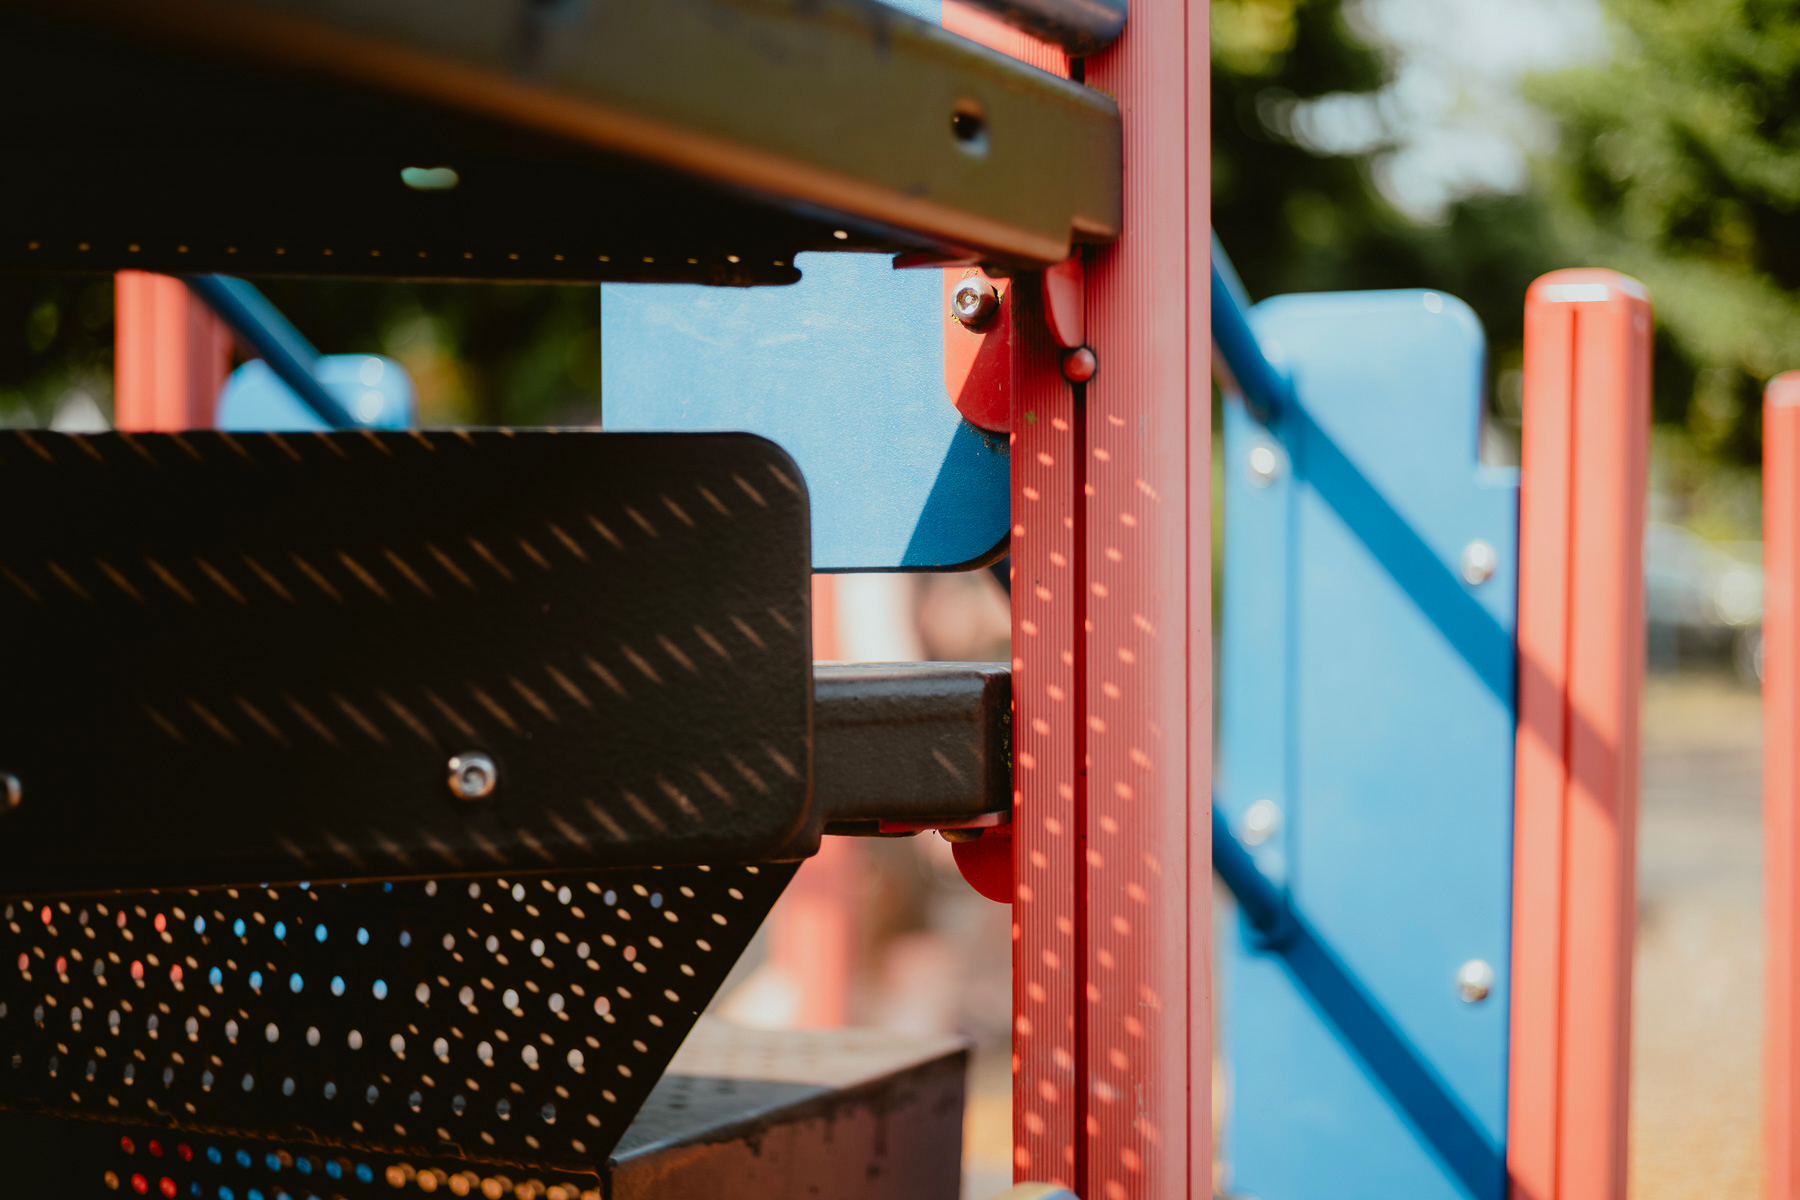 Close in view of speckled shadows on a red and blue play structure. Some blurred green trees in the background.